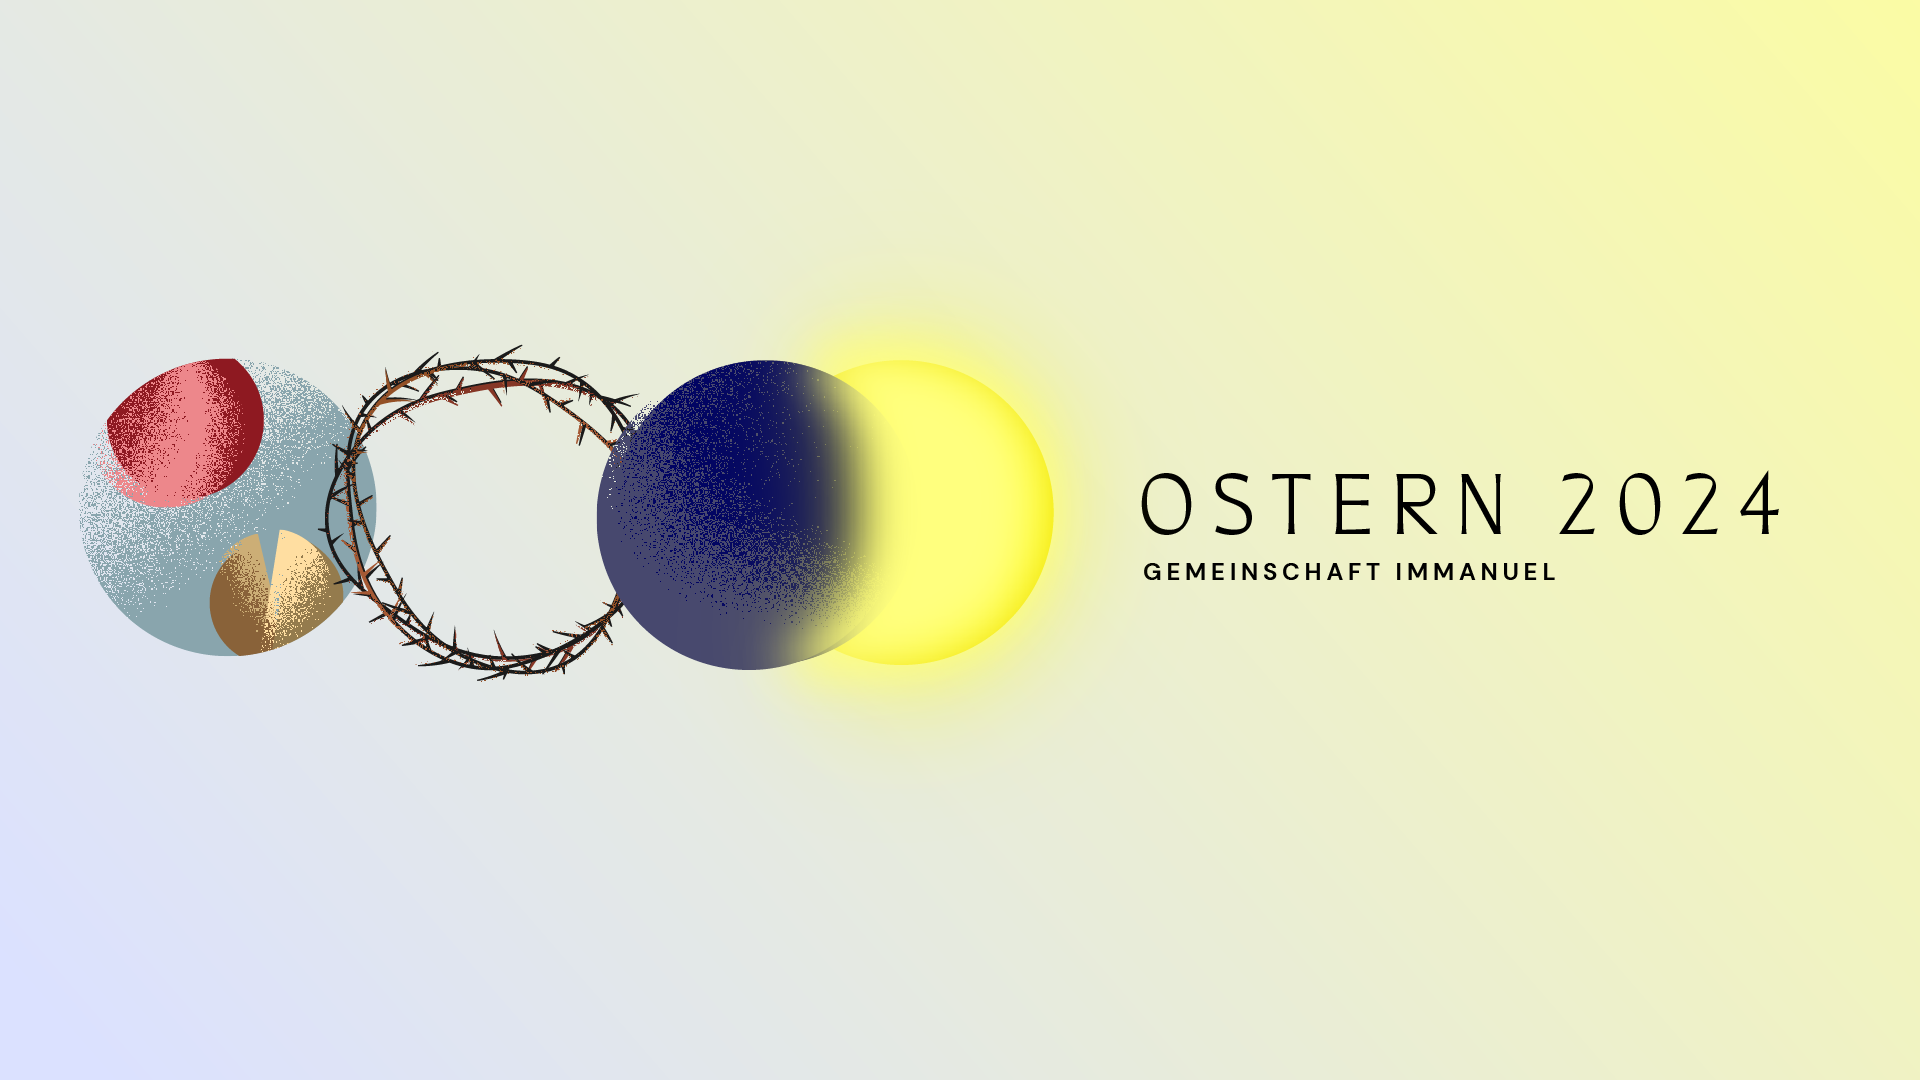 Ostertage